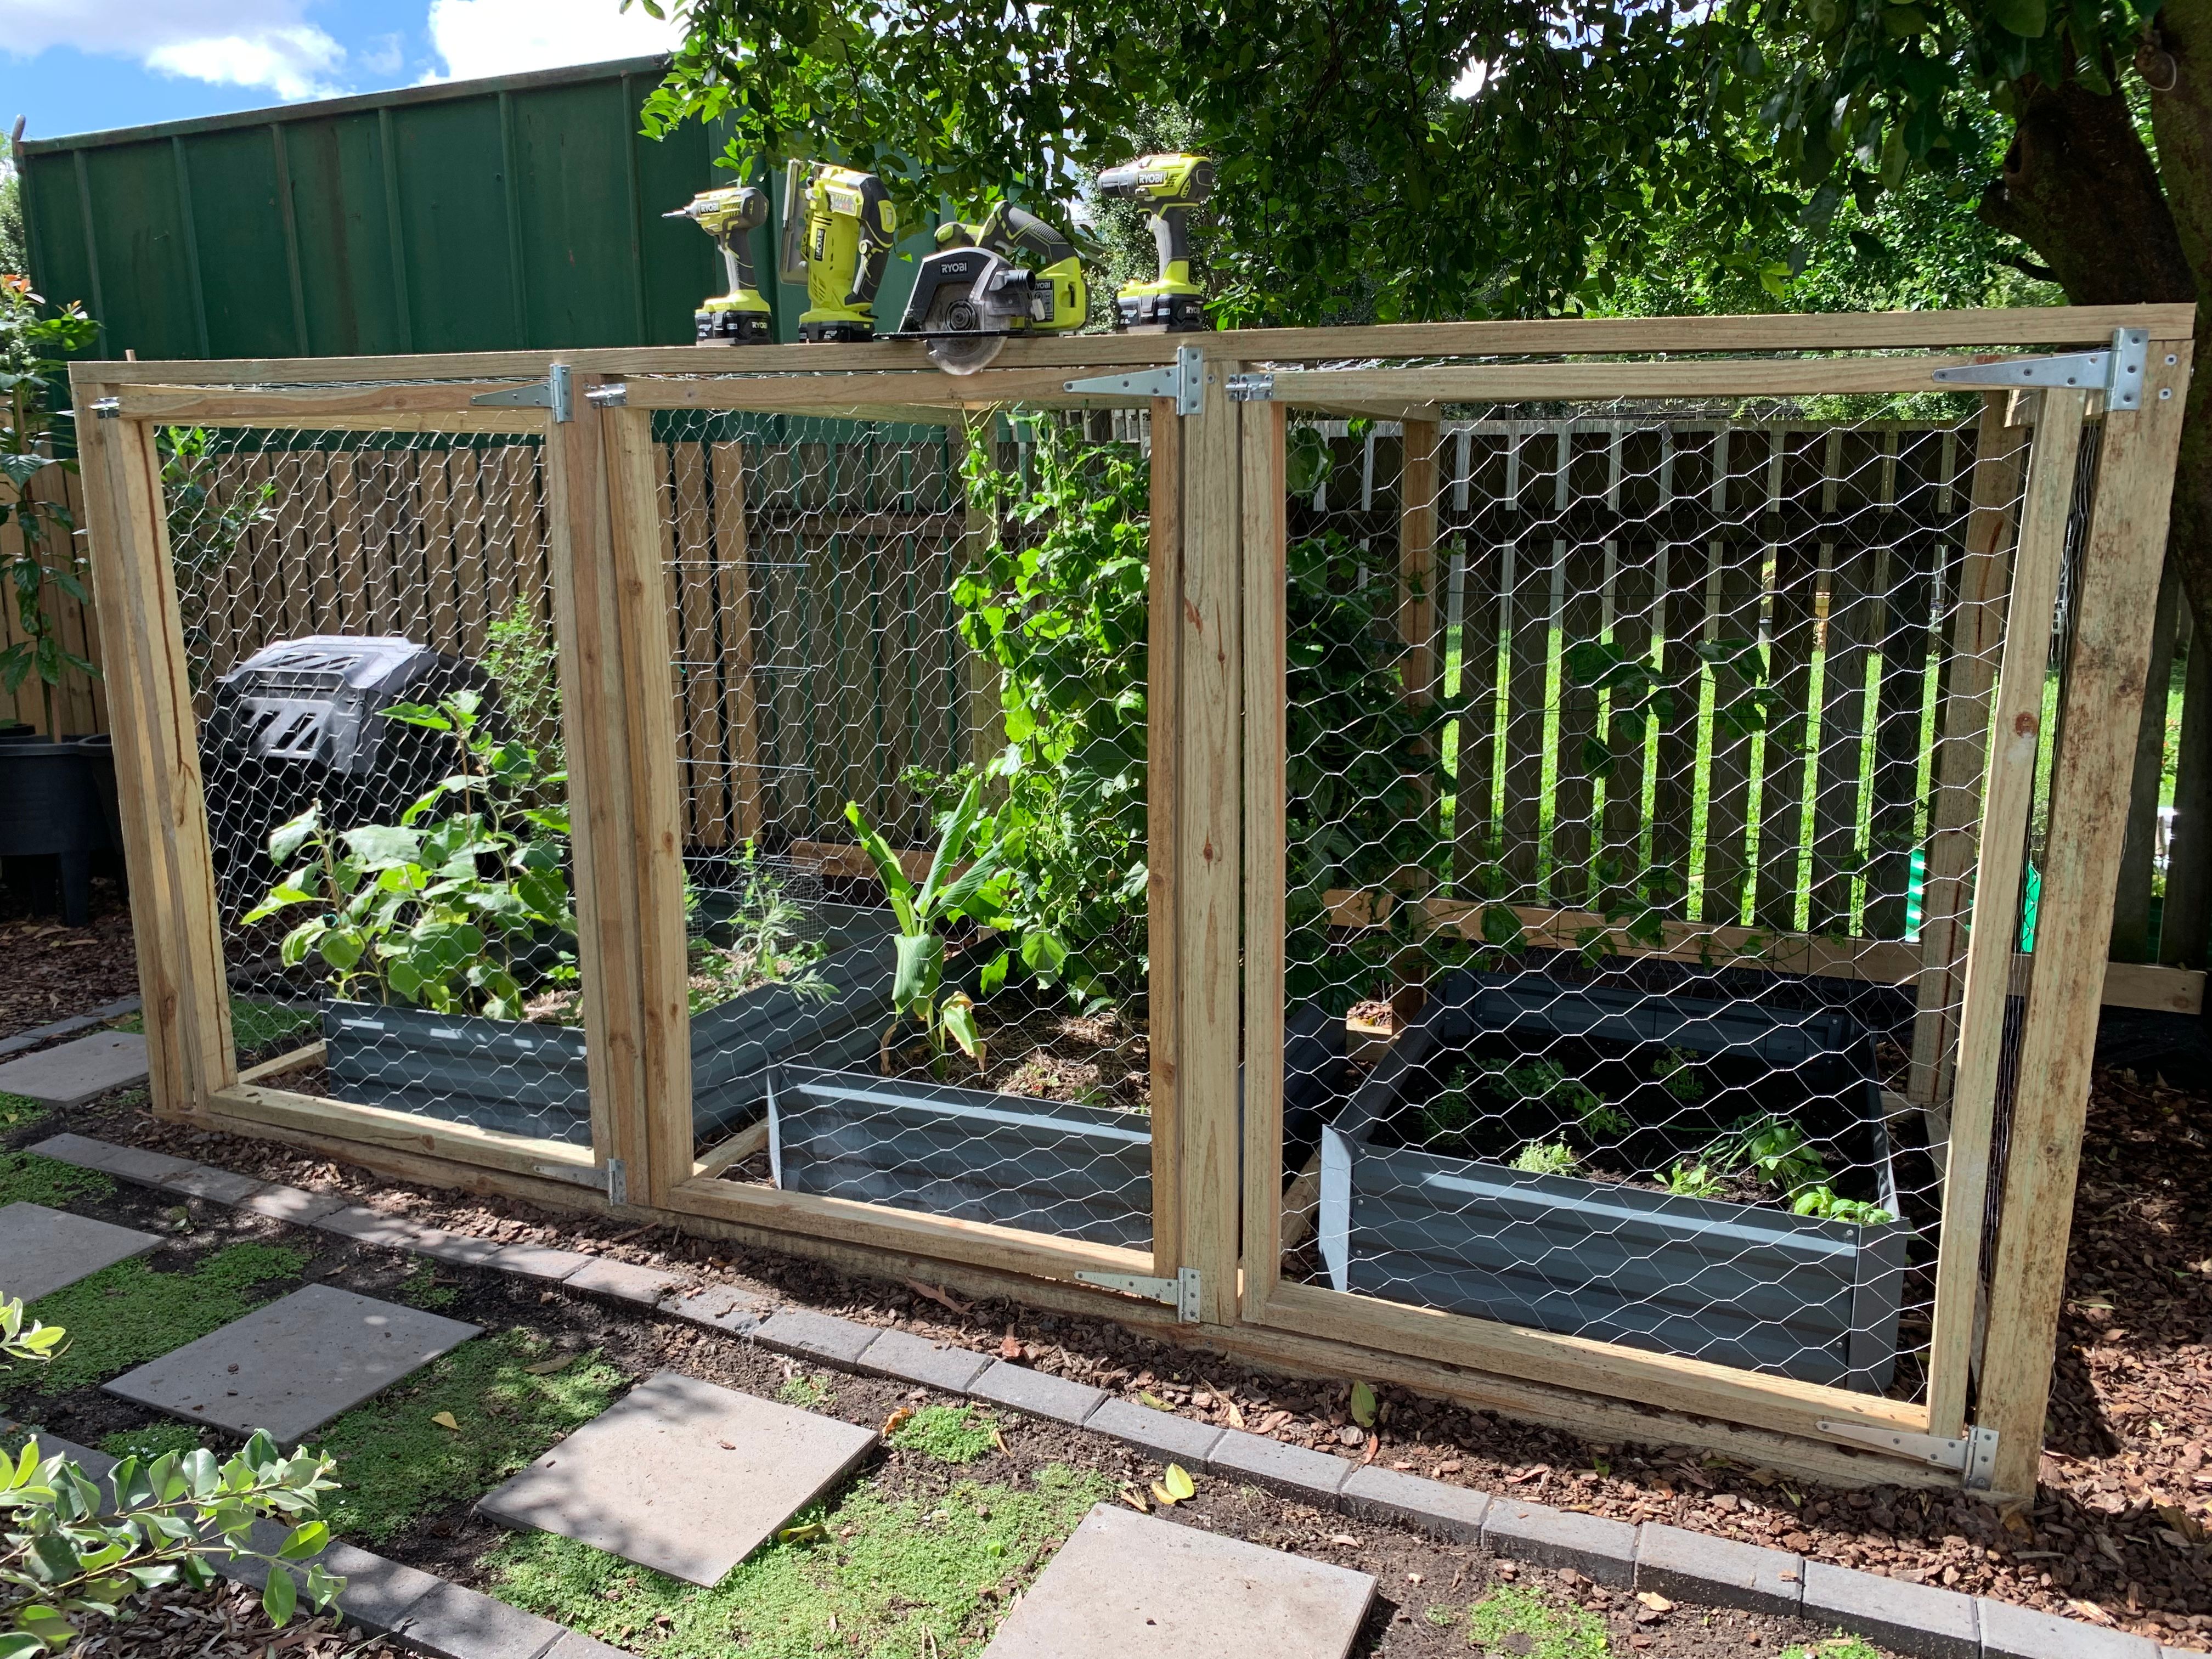 We have built a large enclosure to cover and protect our vege gardens (and to stop our puppy from taking up gardening as a hobby) using our reliable Ryobi impact driver, drill, circular saw and reciprocating saw.   Having battery operated tools allowed us to cut and build the structure right where it needed to be and not carry heavy objects into place.